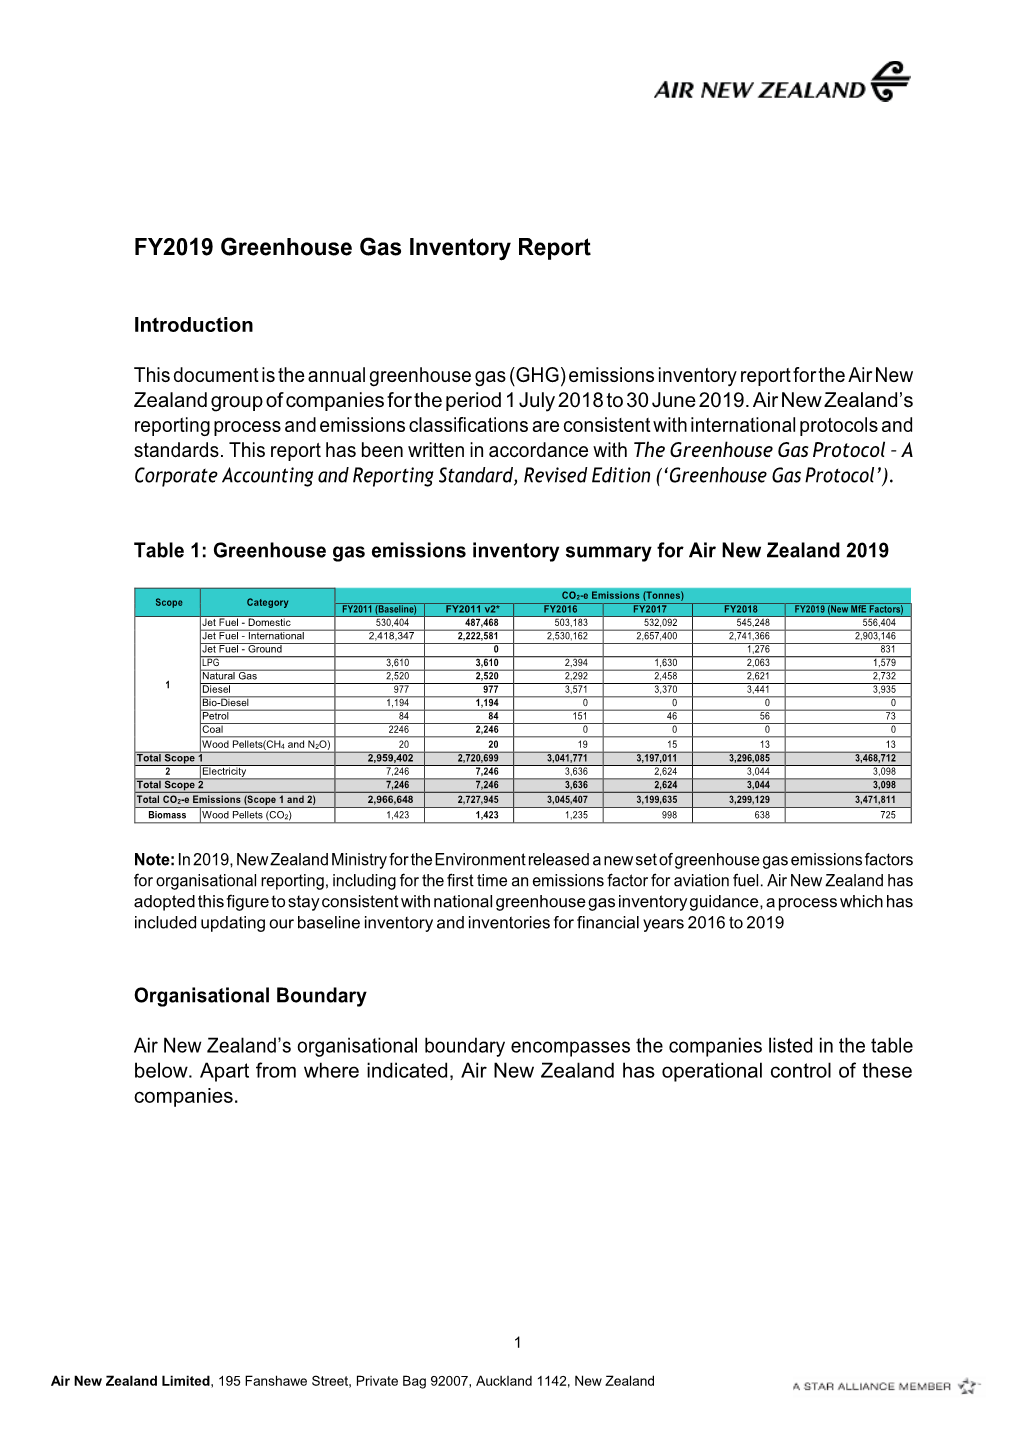 FY2019 Greenhouse Gas Inventory Report